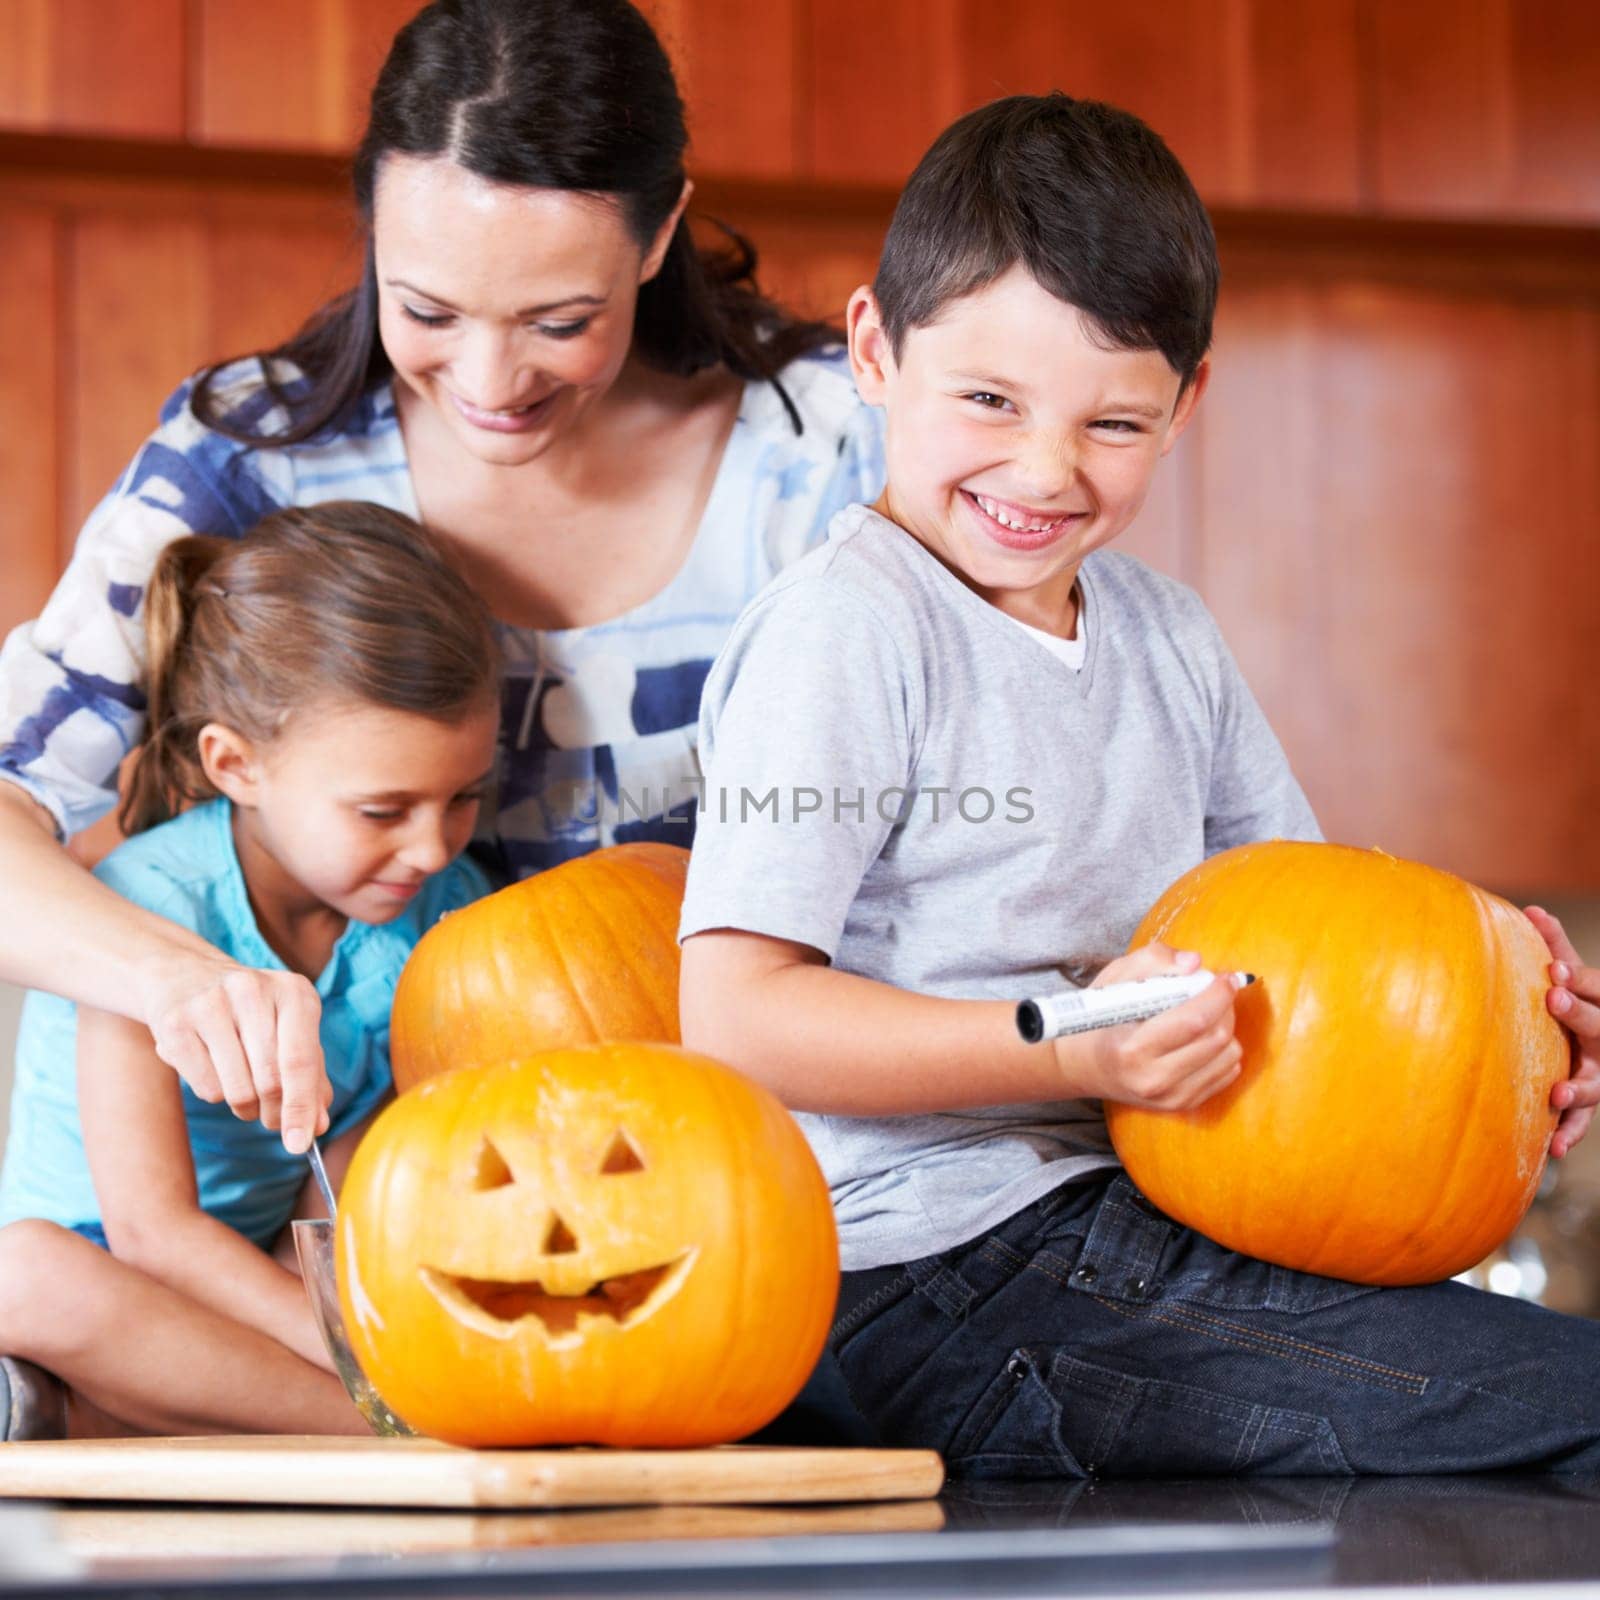 Halloween, pumpkin and a family in the kitchen of their home together for holiday celebration. Creative, smile or happy with a mother, son and daughter carving a face into a vegetable for decoration.